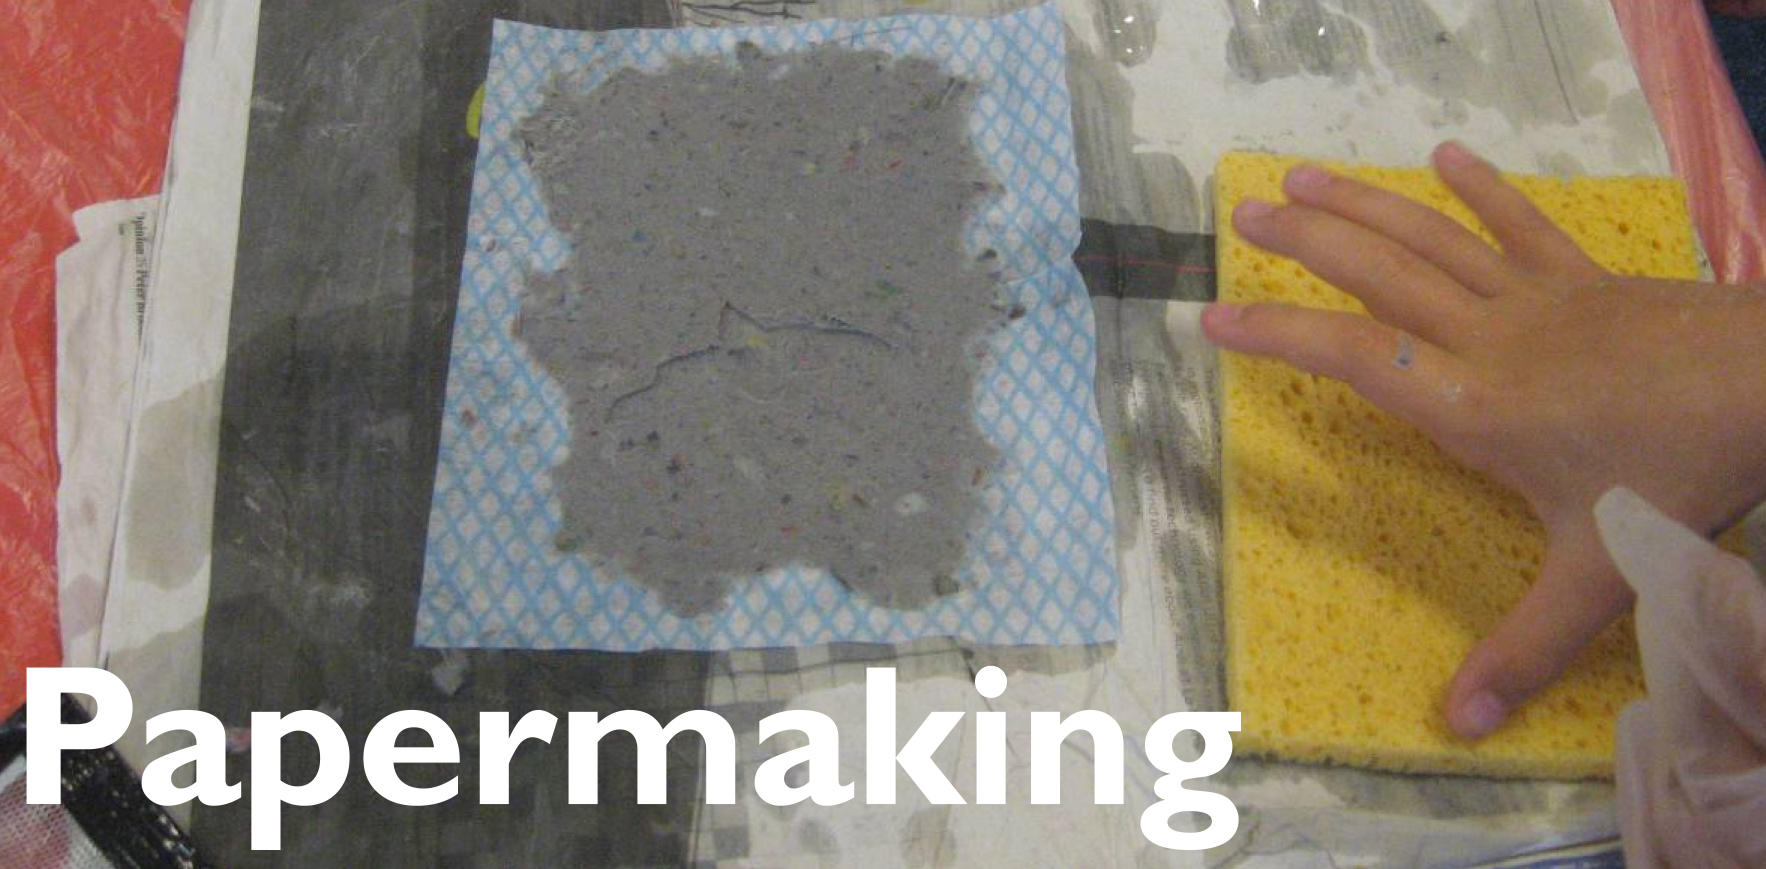 Papermaking Image